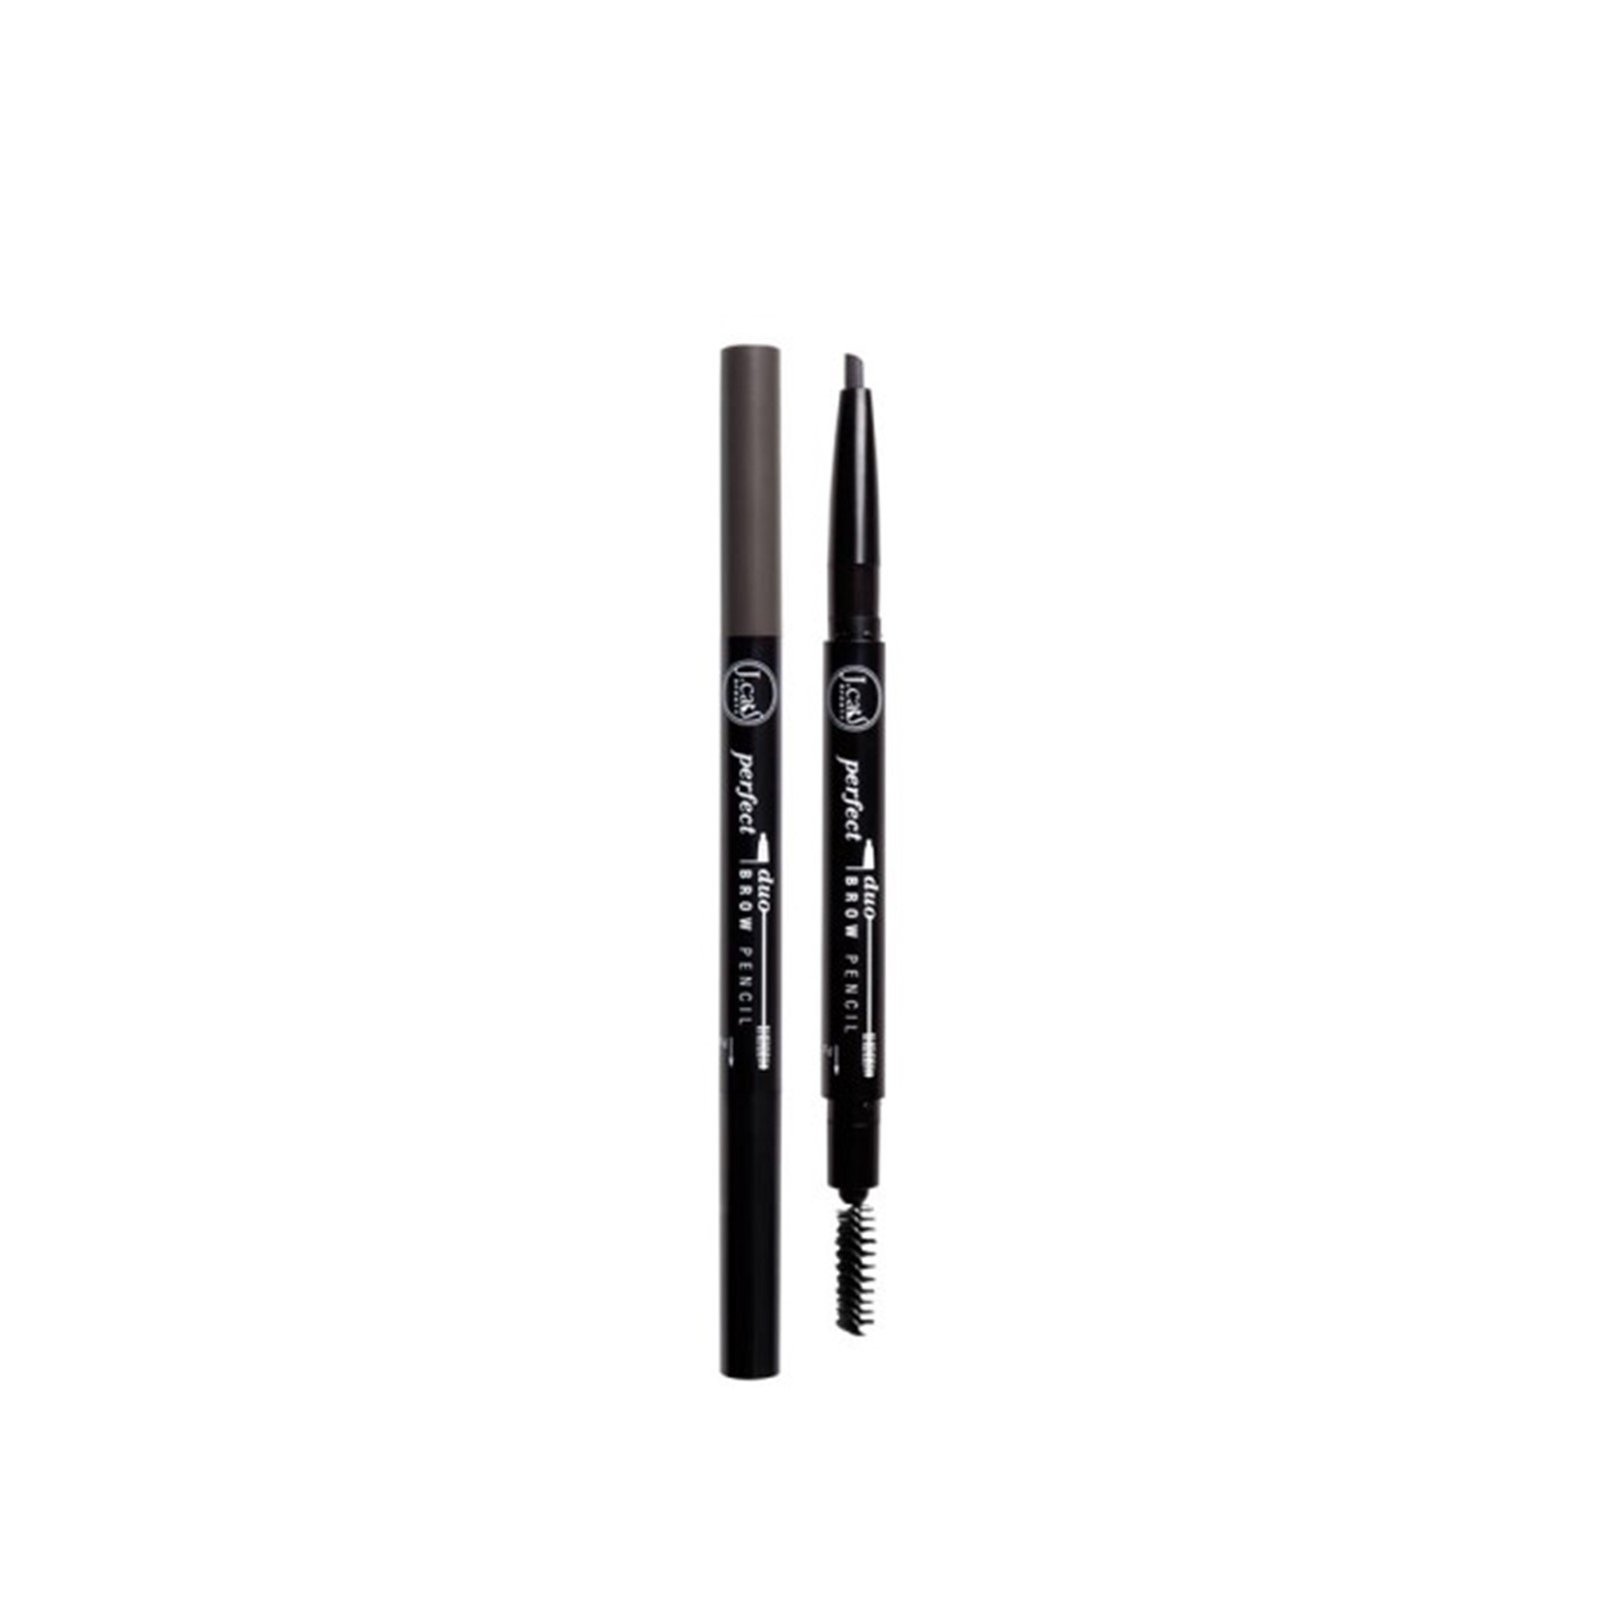 J.Cat Perfect Duo Brow Pencil 102 Charcoal 0.25g